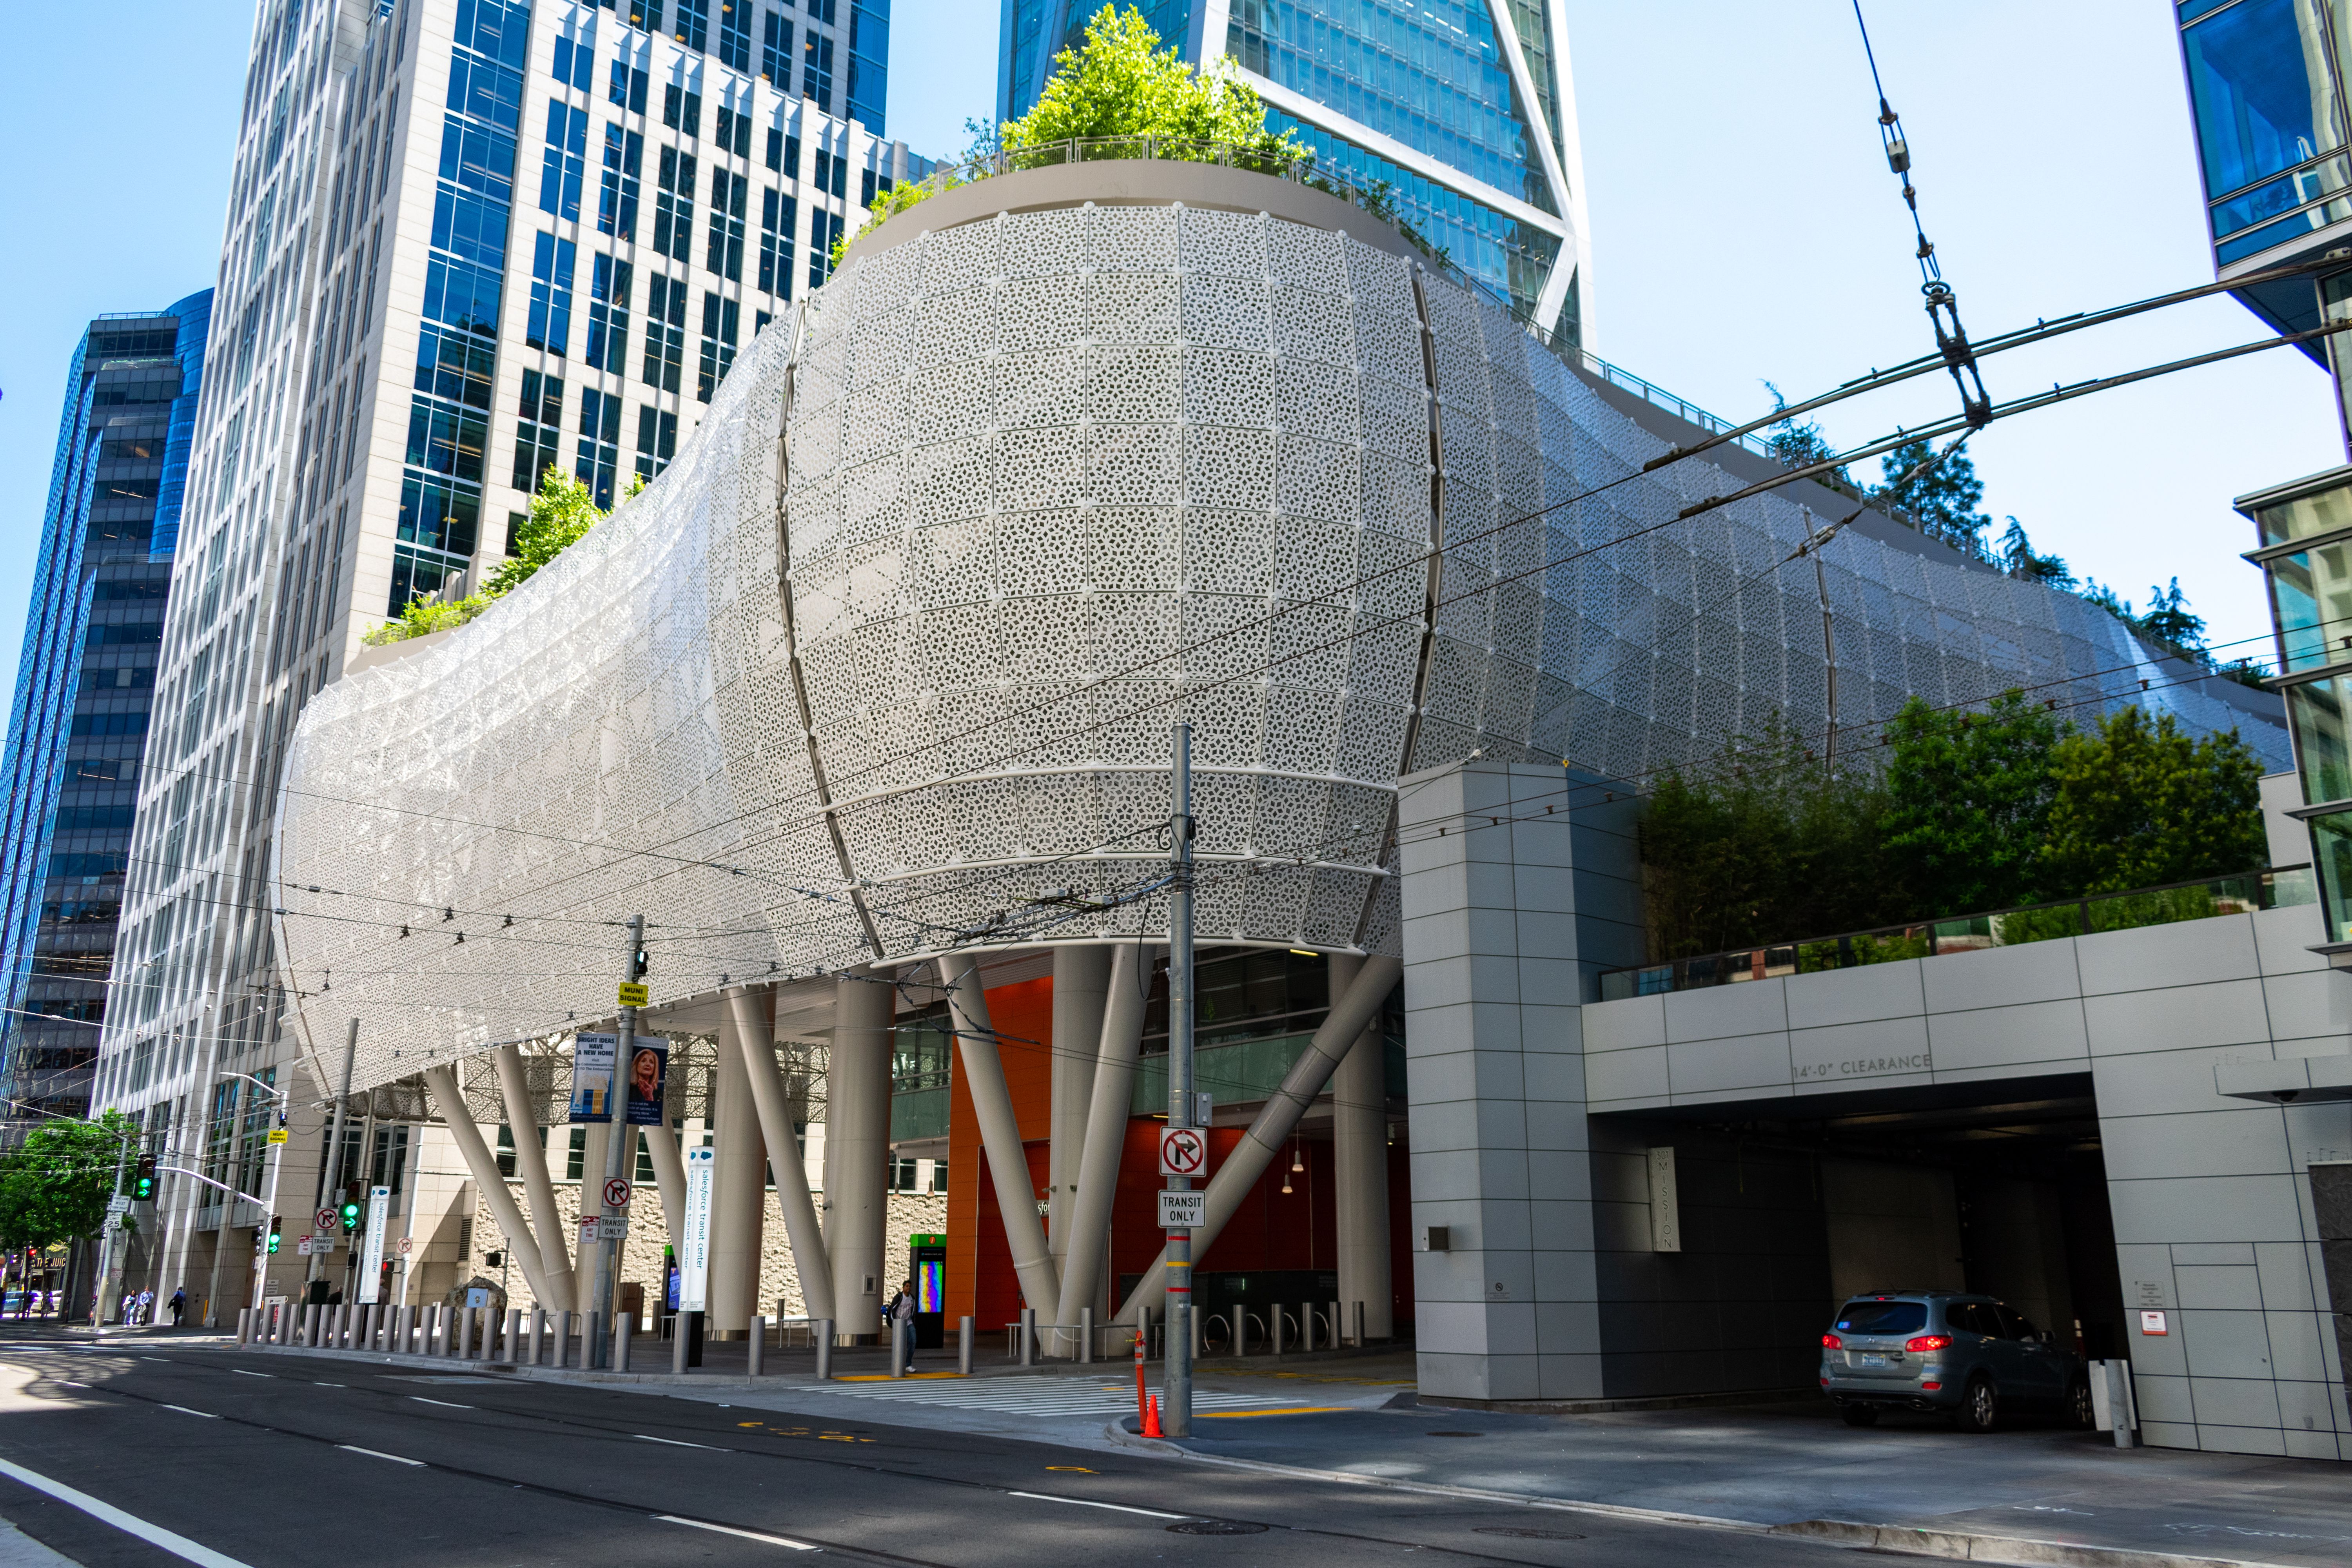 Unique fabrication design on the exterior of the Transbay building next to a parking garage